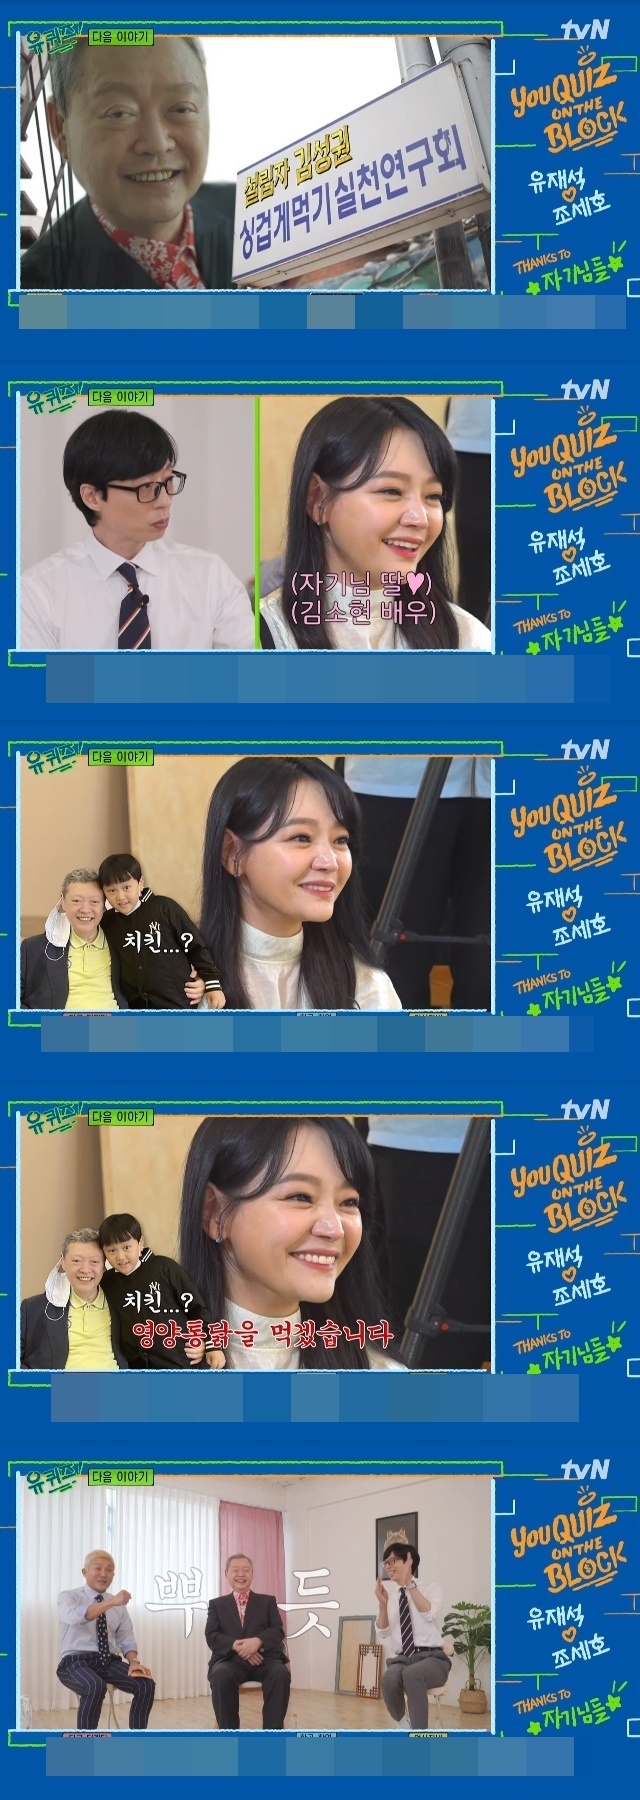 Musical actor Kim So-hyun appeared with Physician father and You Quiz on the Block and attracted attention.Kim So-hyun and his father Kim Sung-kwon appeared in the TVN You Quiz on the Block (hereinafter referred to as You Quiz on the Block) 158th trailer broadcast on June 22nd.Kim So-hyuns father was introduced as the founder of the Blind Eating Practice Research Society and a treatment for kidney disease. You should be careful when eating out.Two people can eat less salt if they eat only half a serving, he said, revealing the aspect of the practice study group.The scene also included a daughter and musical actor Kim So-hyun.He was asked by Yoo Jae-Suk, Do you eat it at home? He said, If our son is chicken, he will say I will eat a nutritious chicken. Professor Kim Sung-kwon said with a proud expression and laughed.